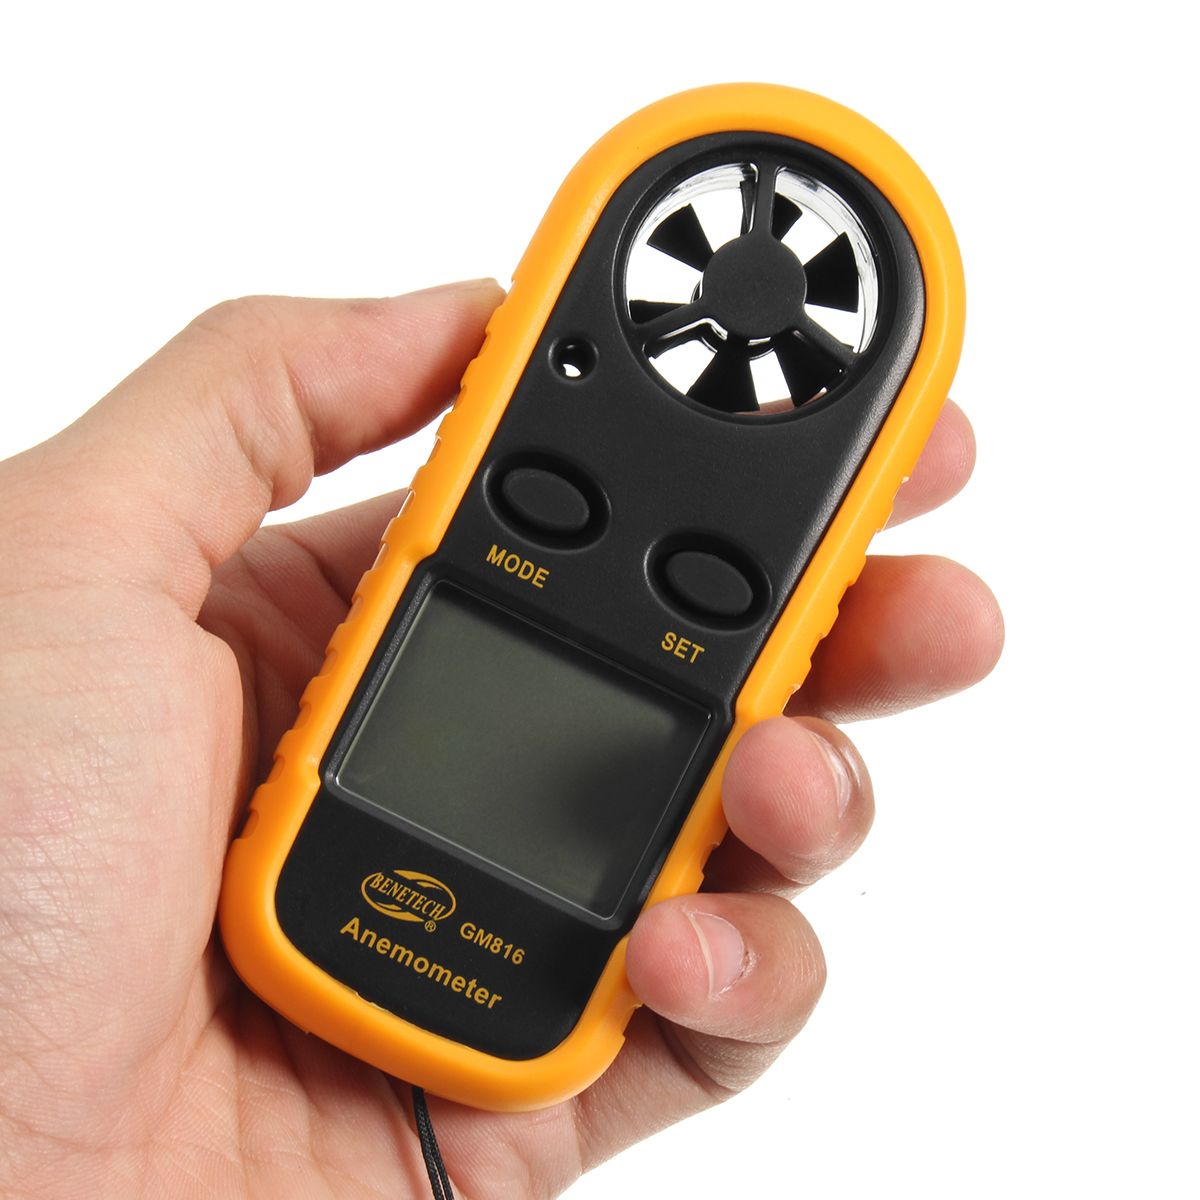 Digital-LCD-Anemometer-Thermometer-Air-Wind-Speed-Meter-Temperature-Tester-1277544